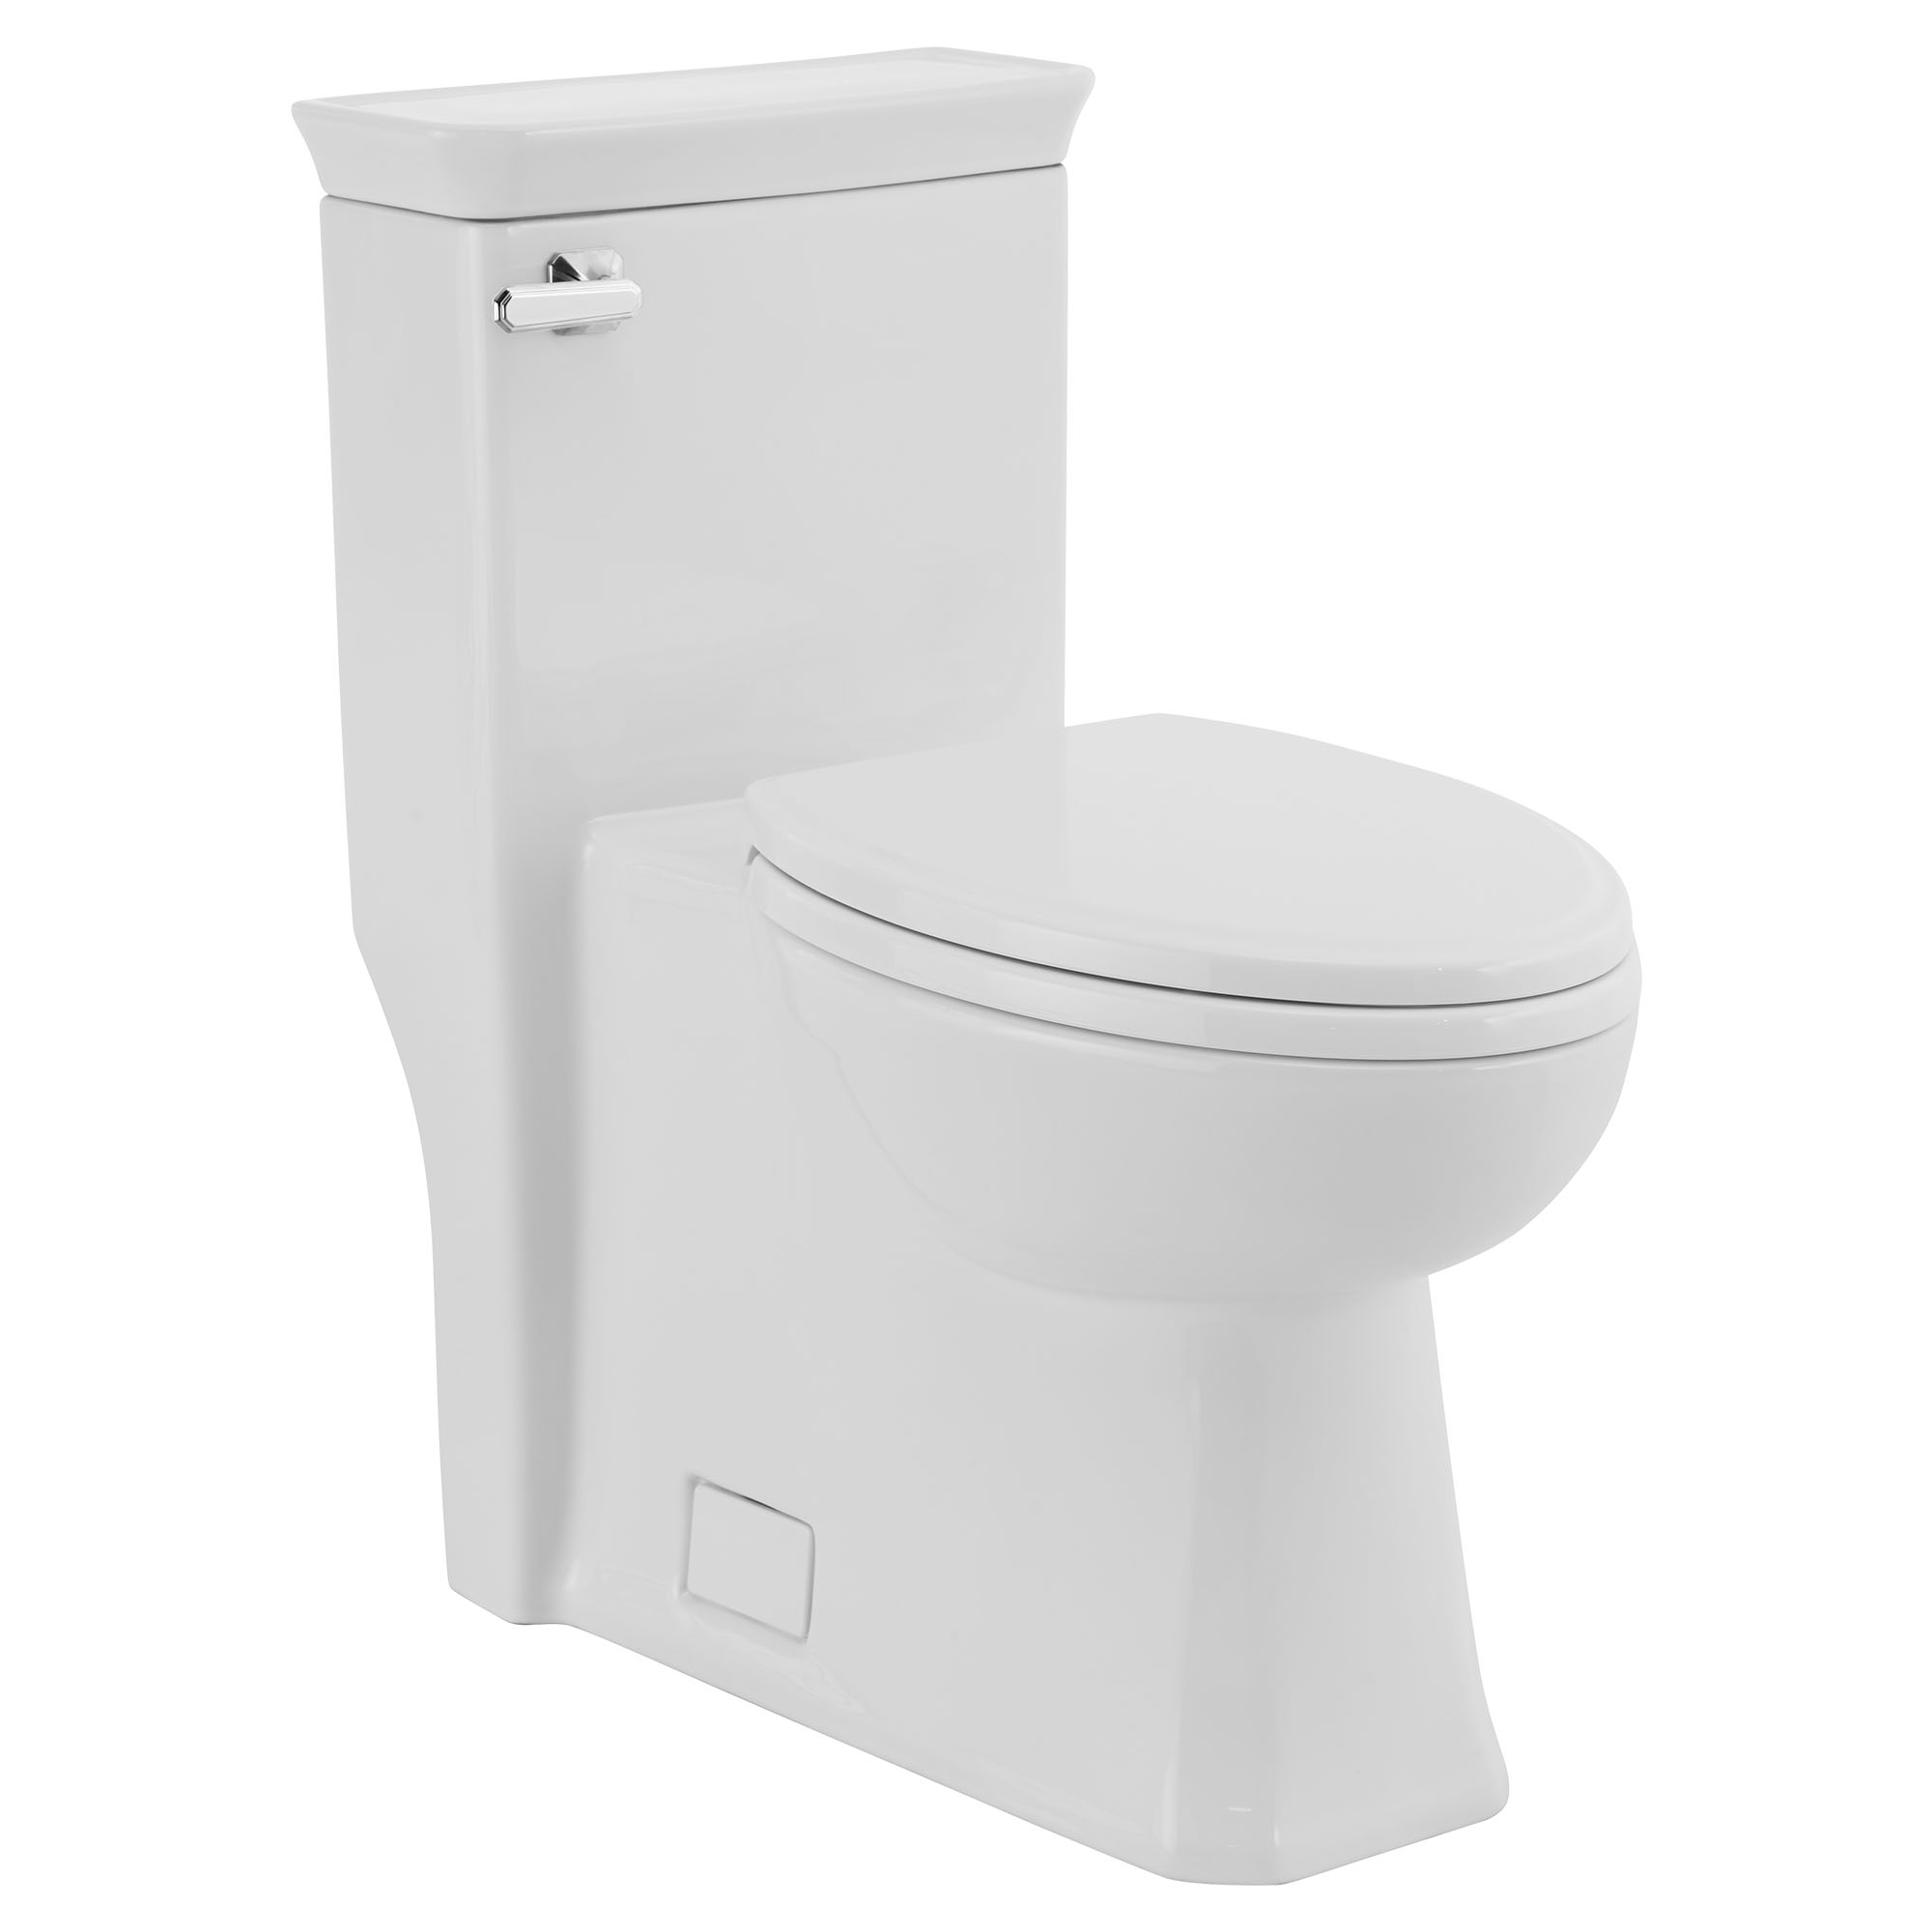 Belshire One-Piece Chair Height Elongated Toilet with Seat